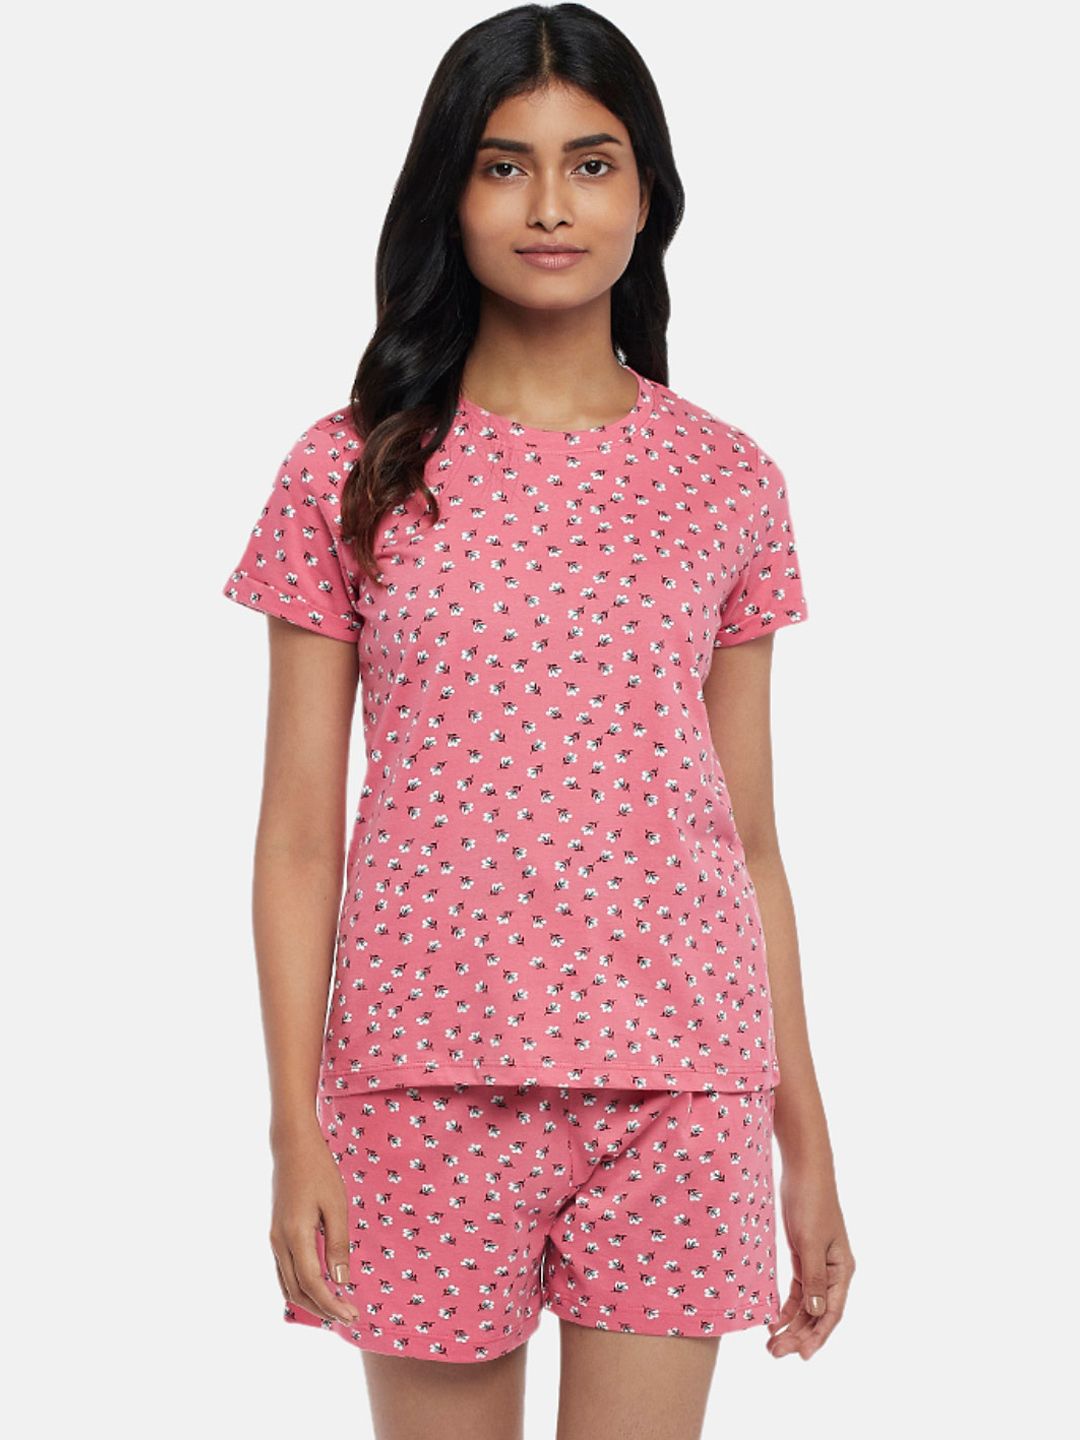 Dreamz by Pantaloons Women Coral & White Printed Night suit Price in India